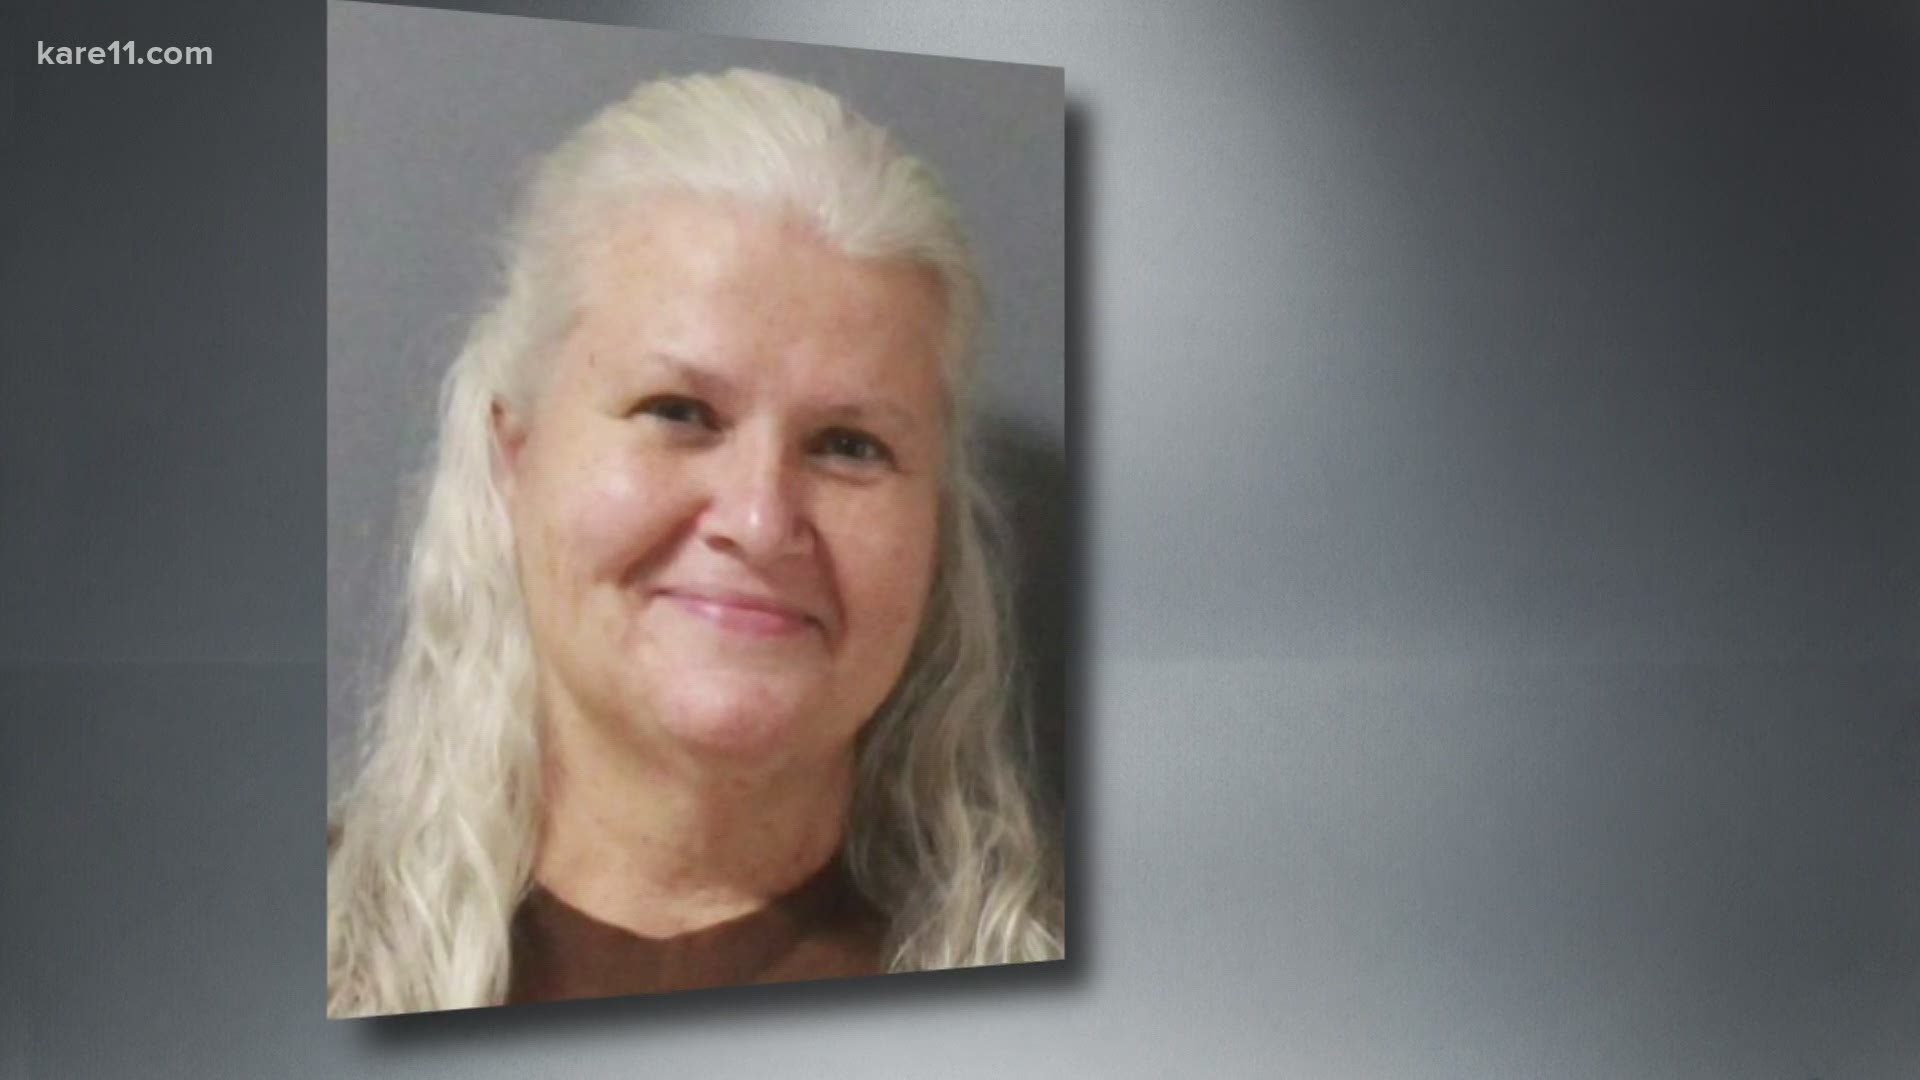 After being convicted of a murder in Florida, Lois Riess has pleaded not guilty to murdering her husband in Minnesota.